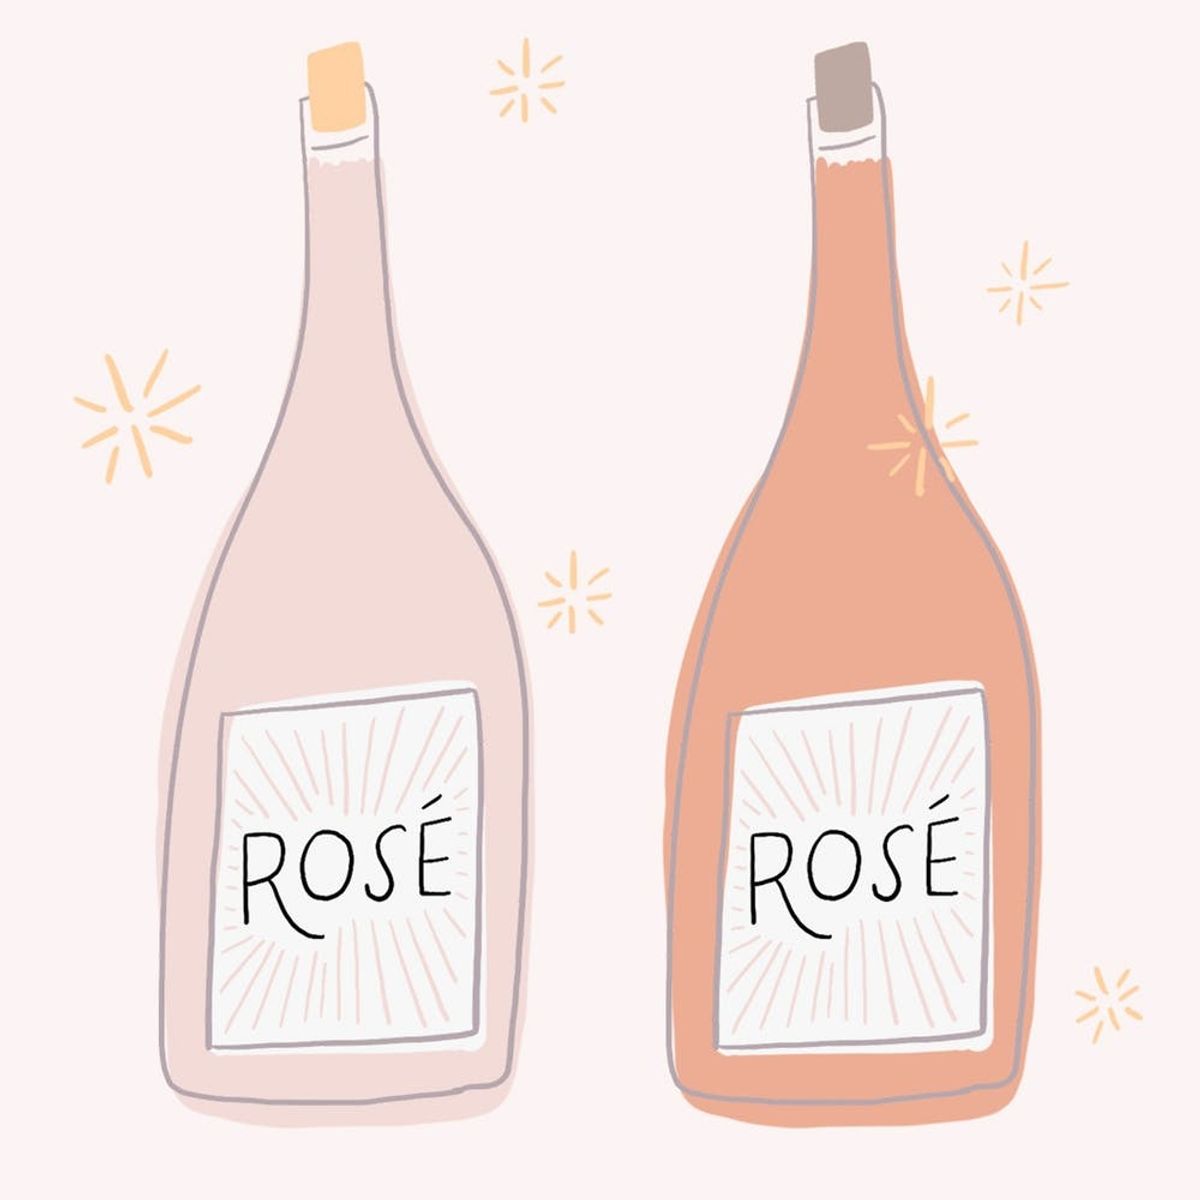 Everything You’ve Ever Wanted to Know About the Color of Your Rosé